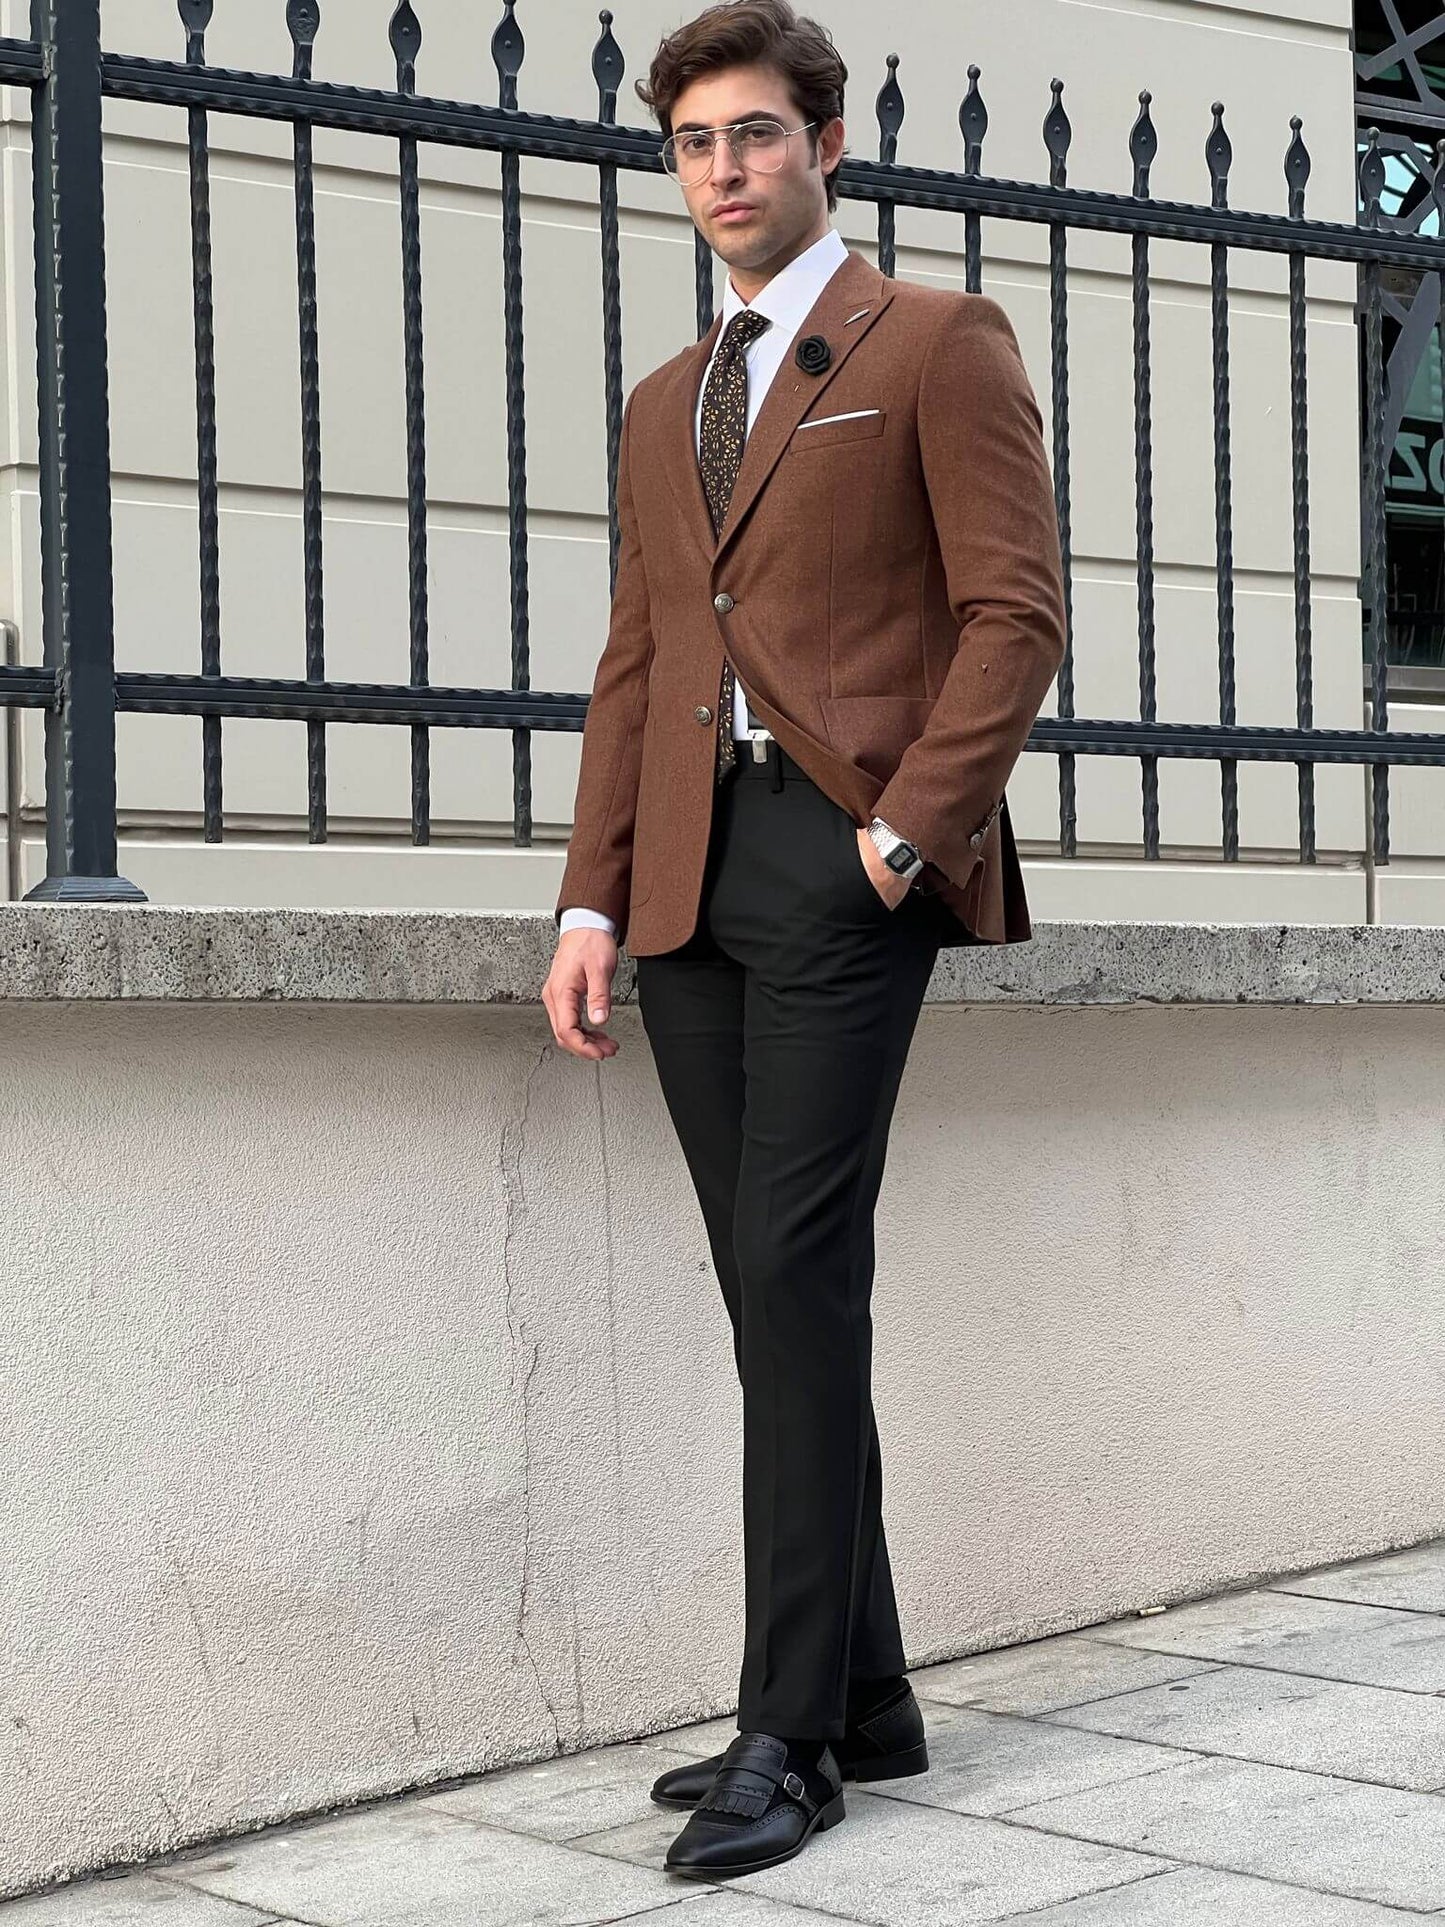 Capture the essence of refined fashion with our male model donning the Camel Jacket